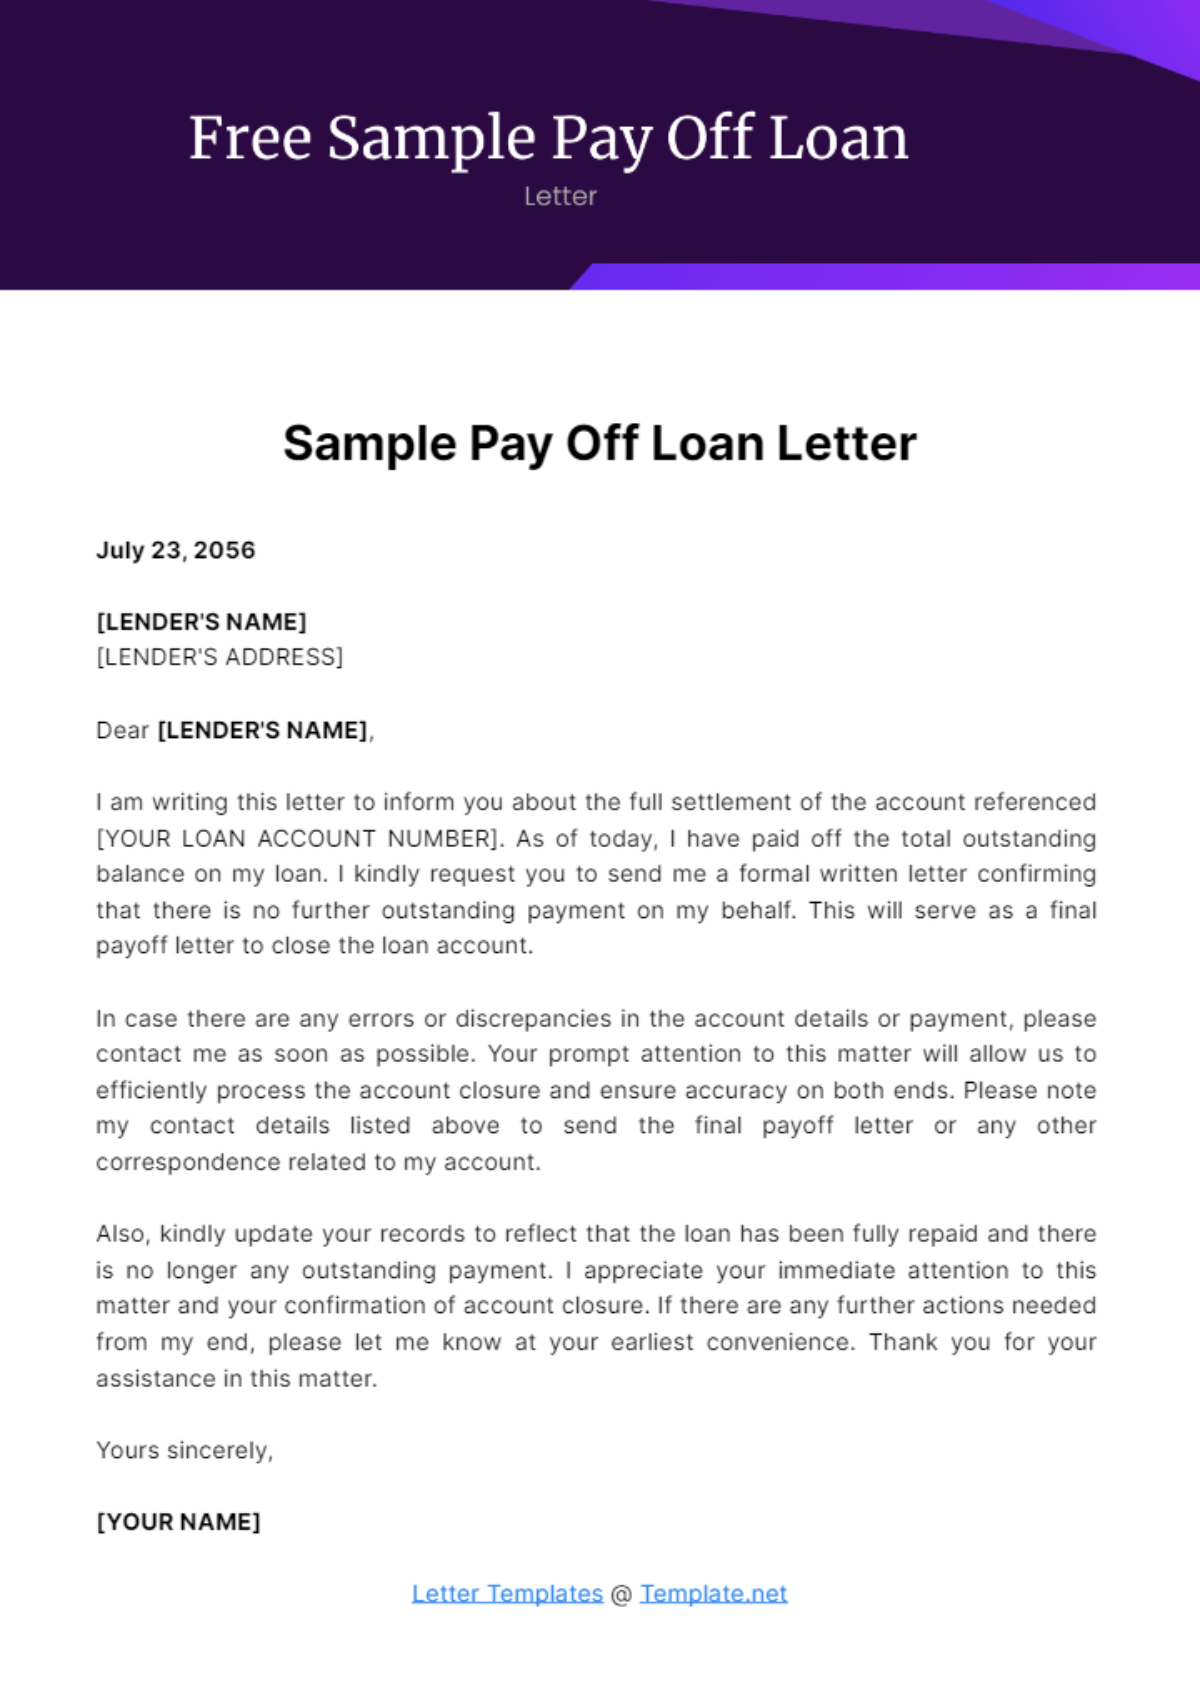 Free Sample Pay Off Loan Letter Template